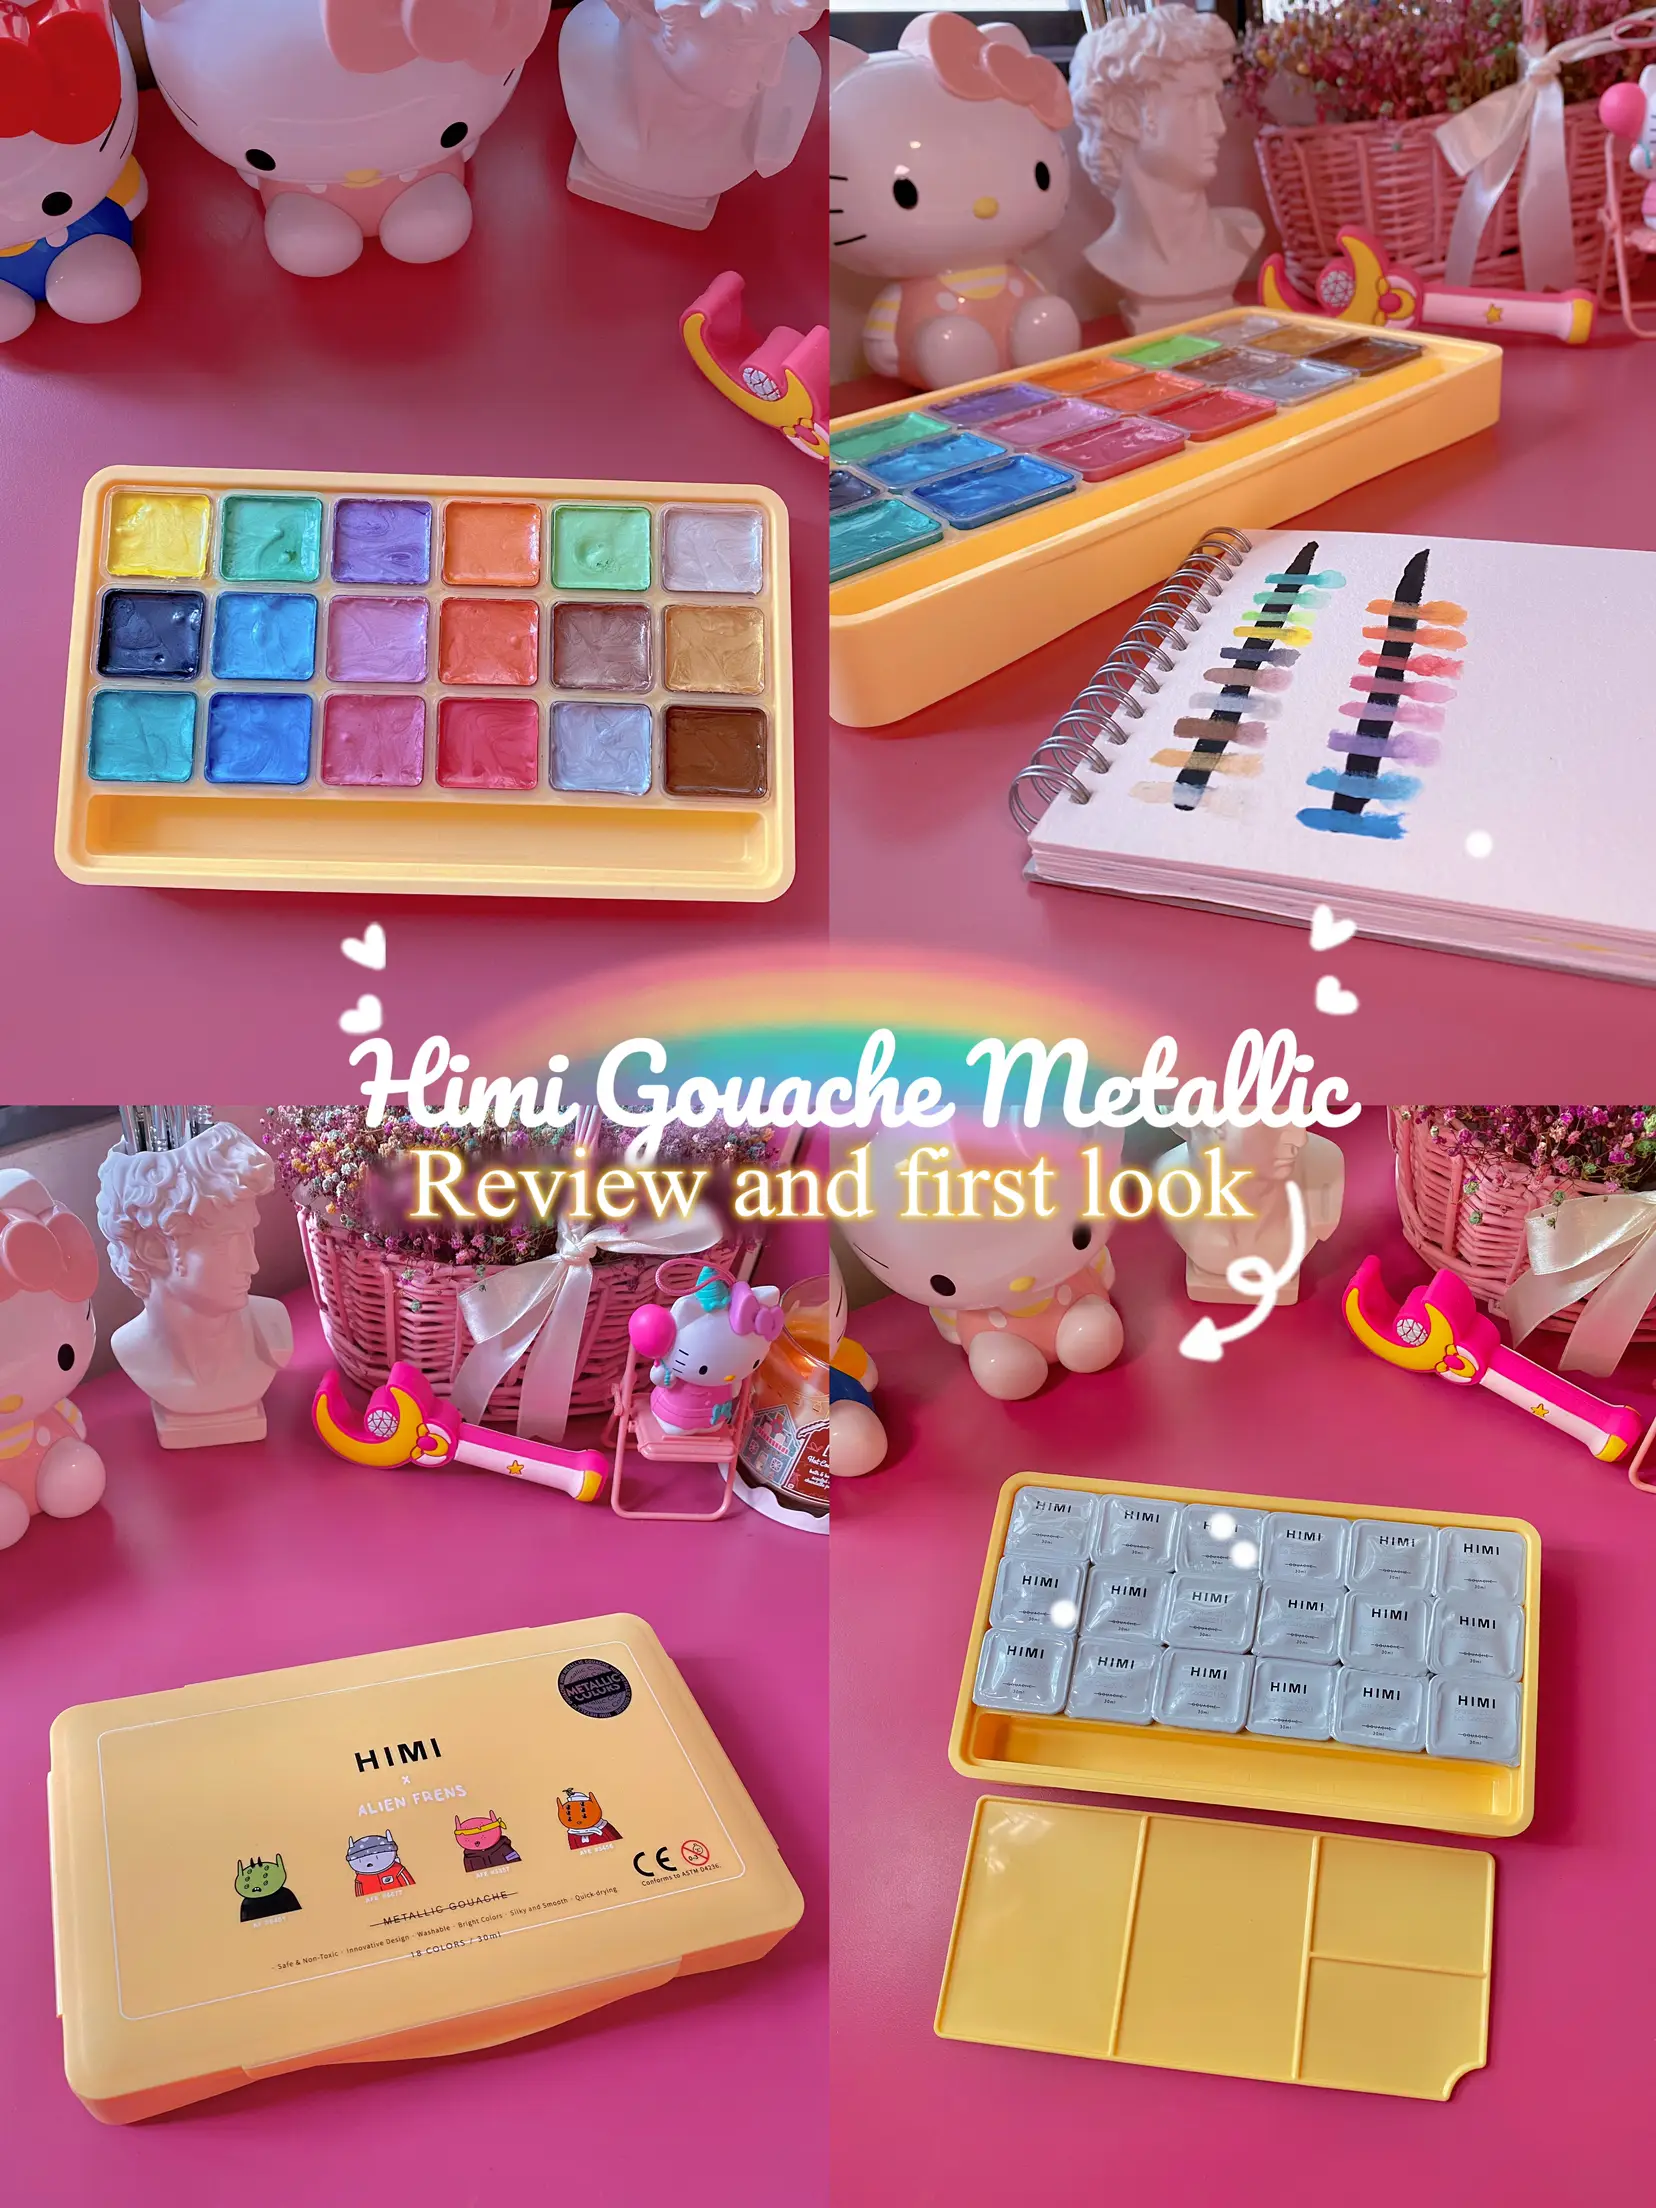 HIMI GOUACHE honest review. Are they worth it? Let's find out